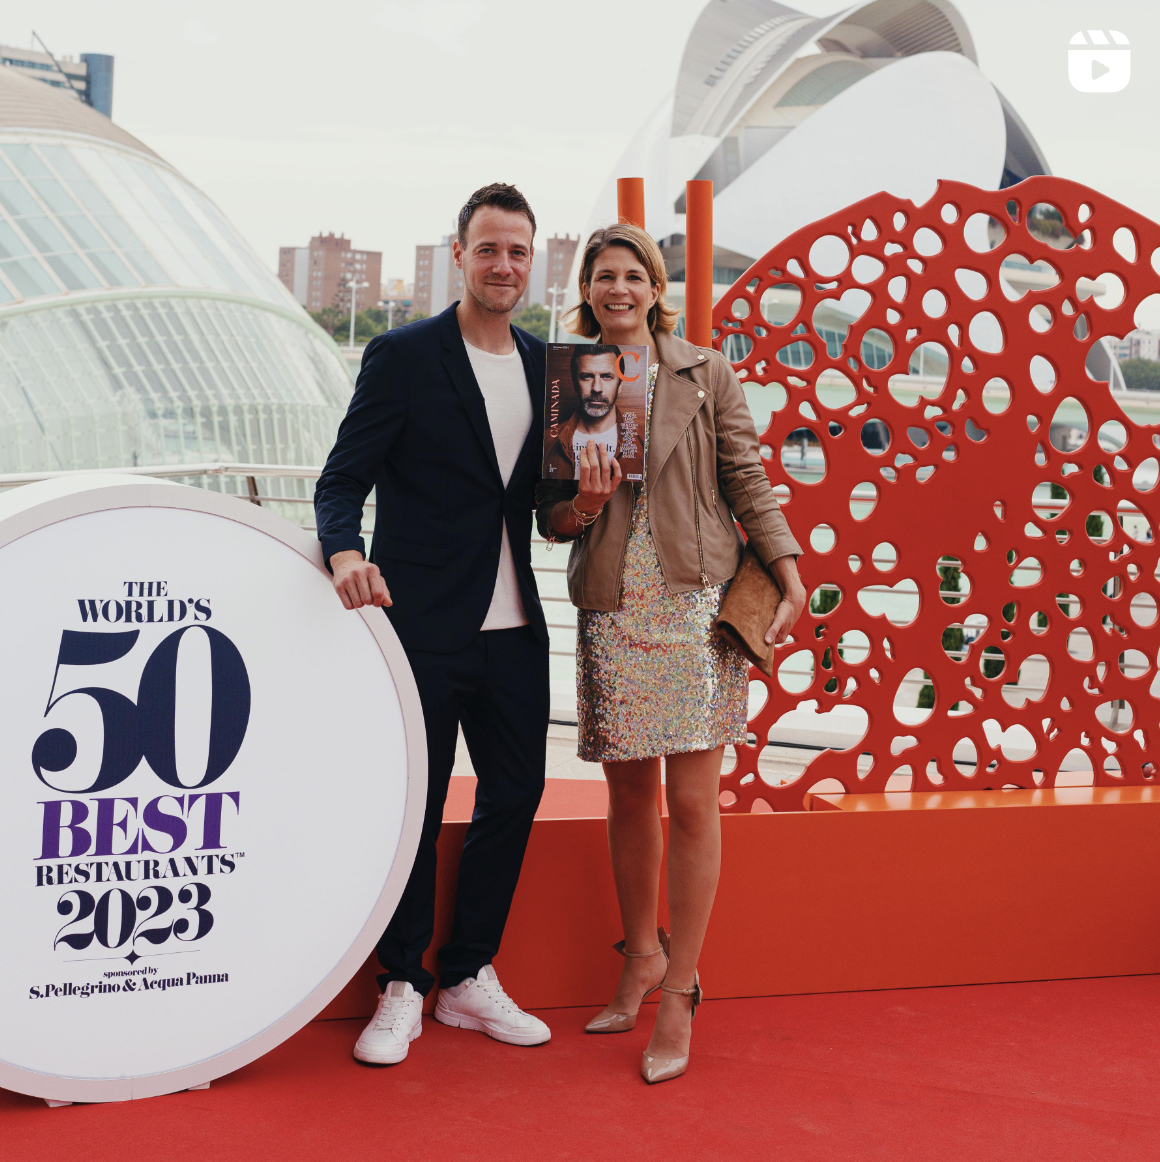 The world's 50 best